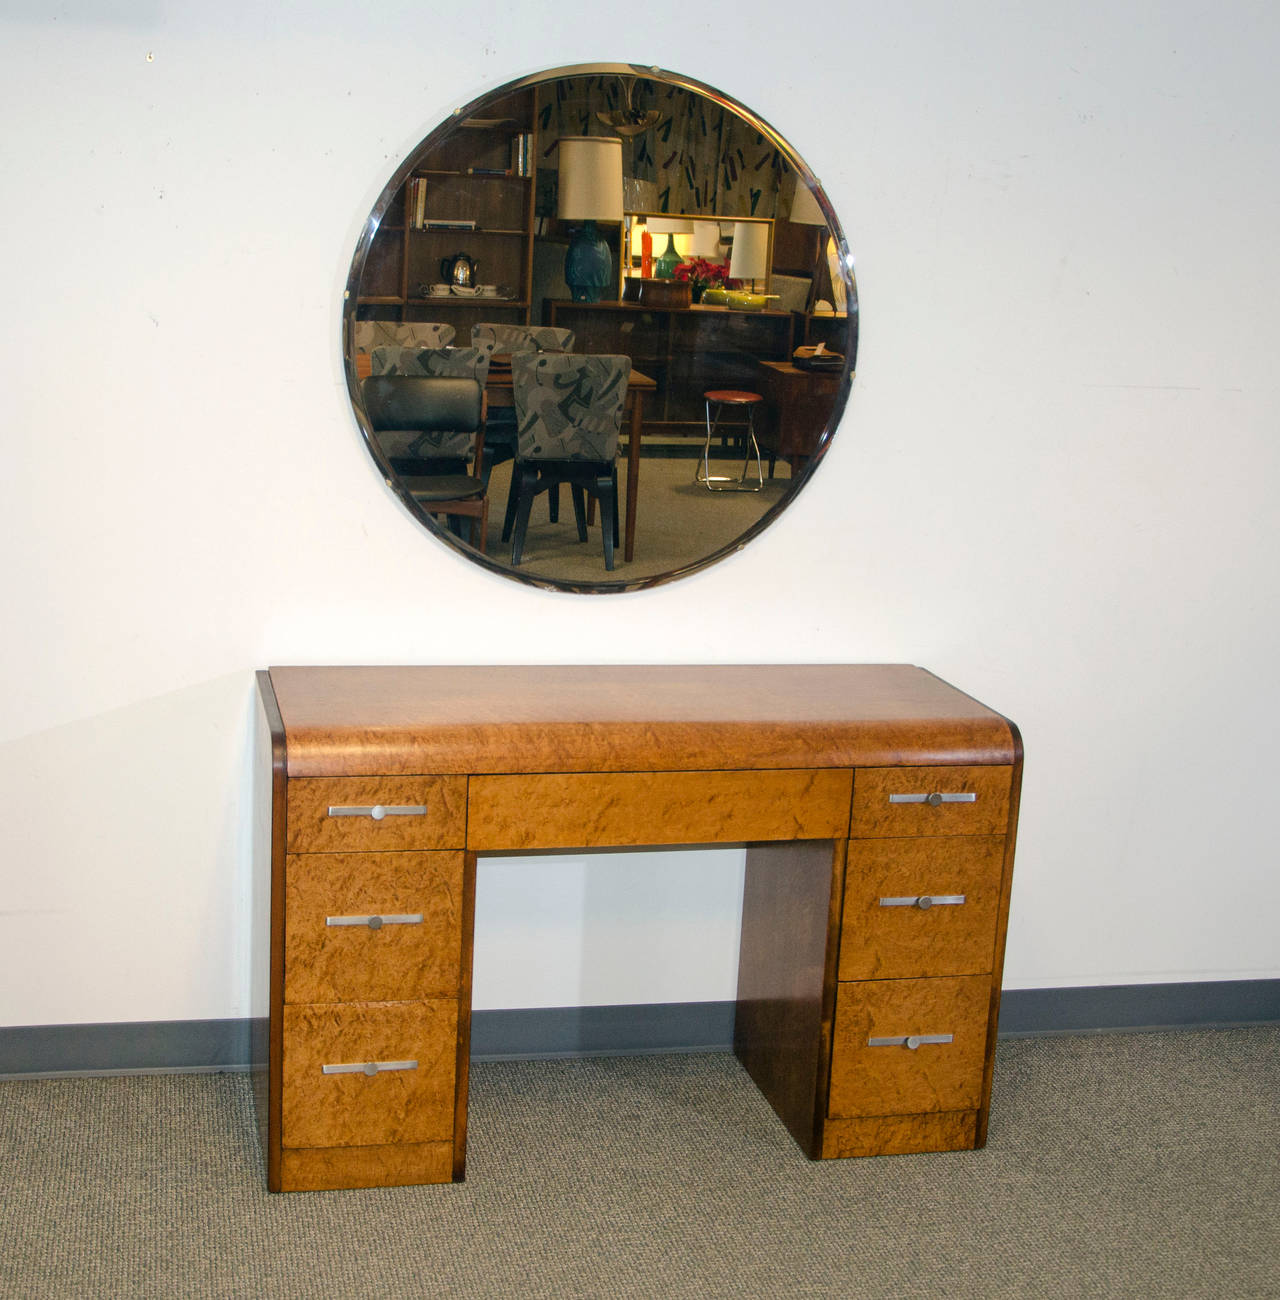 Nice bird's-eye maple vanity desk in the waterfall style. Has original stainless steel Art Deco drawer pulls. The round beveled mirror is a nice pairing. The mirror is 35 1/2